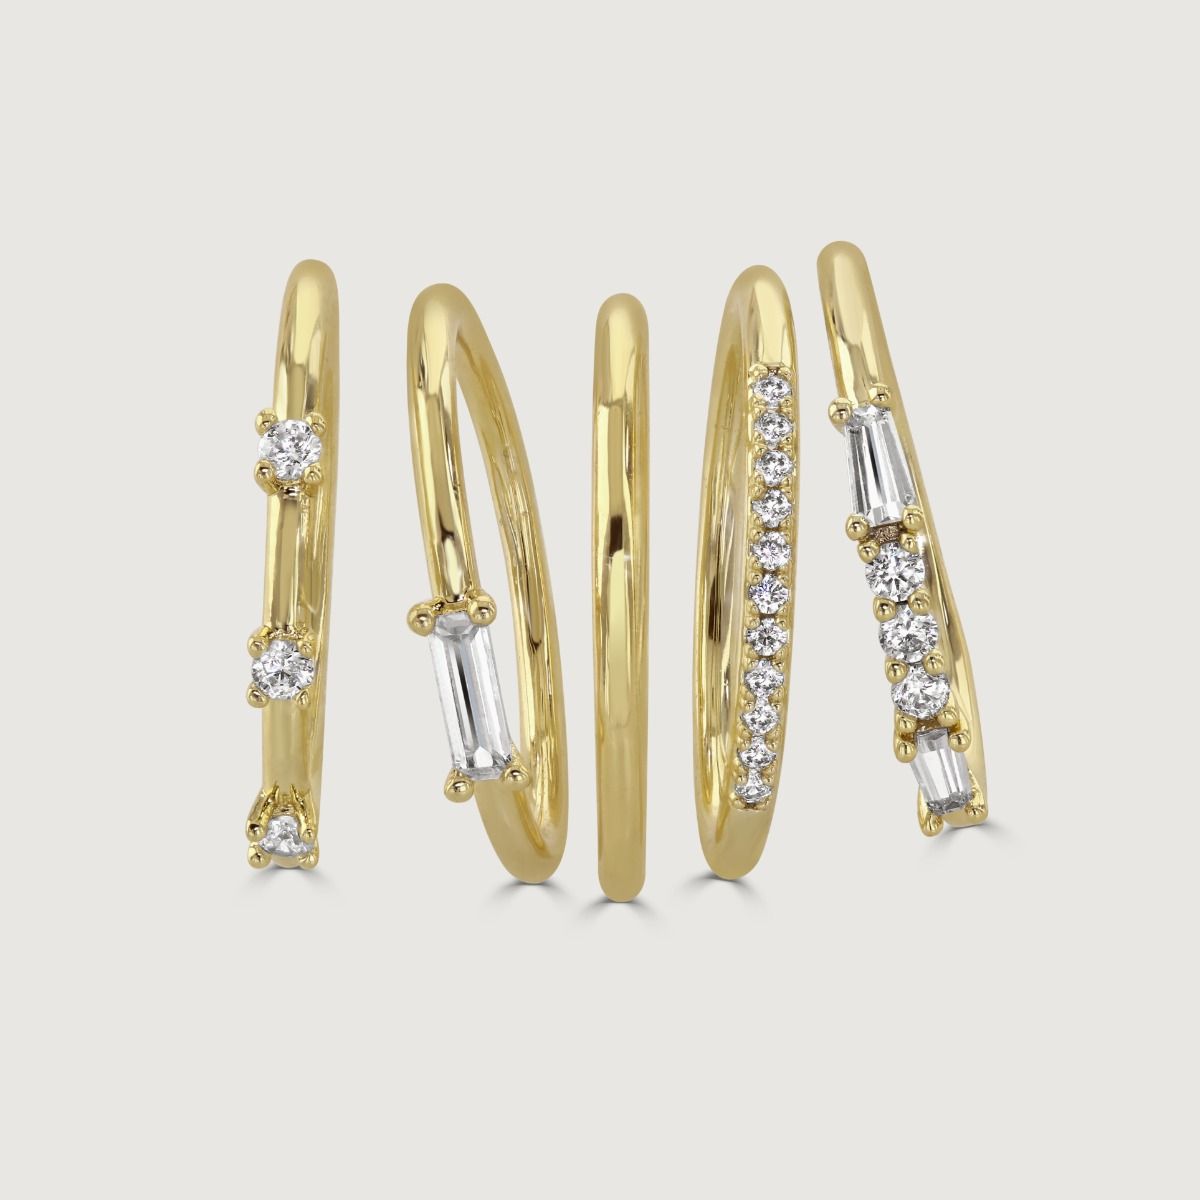 The 5 Piece Stacking Ring Set pairs a plain band with an array of crystal arrangements. These are the ultimate bestseller, as it allows you to wear each ring separately and mix and match. 